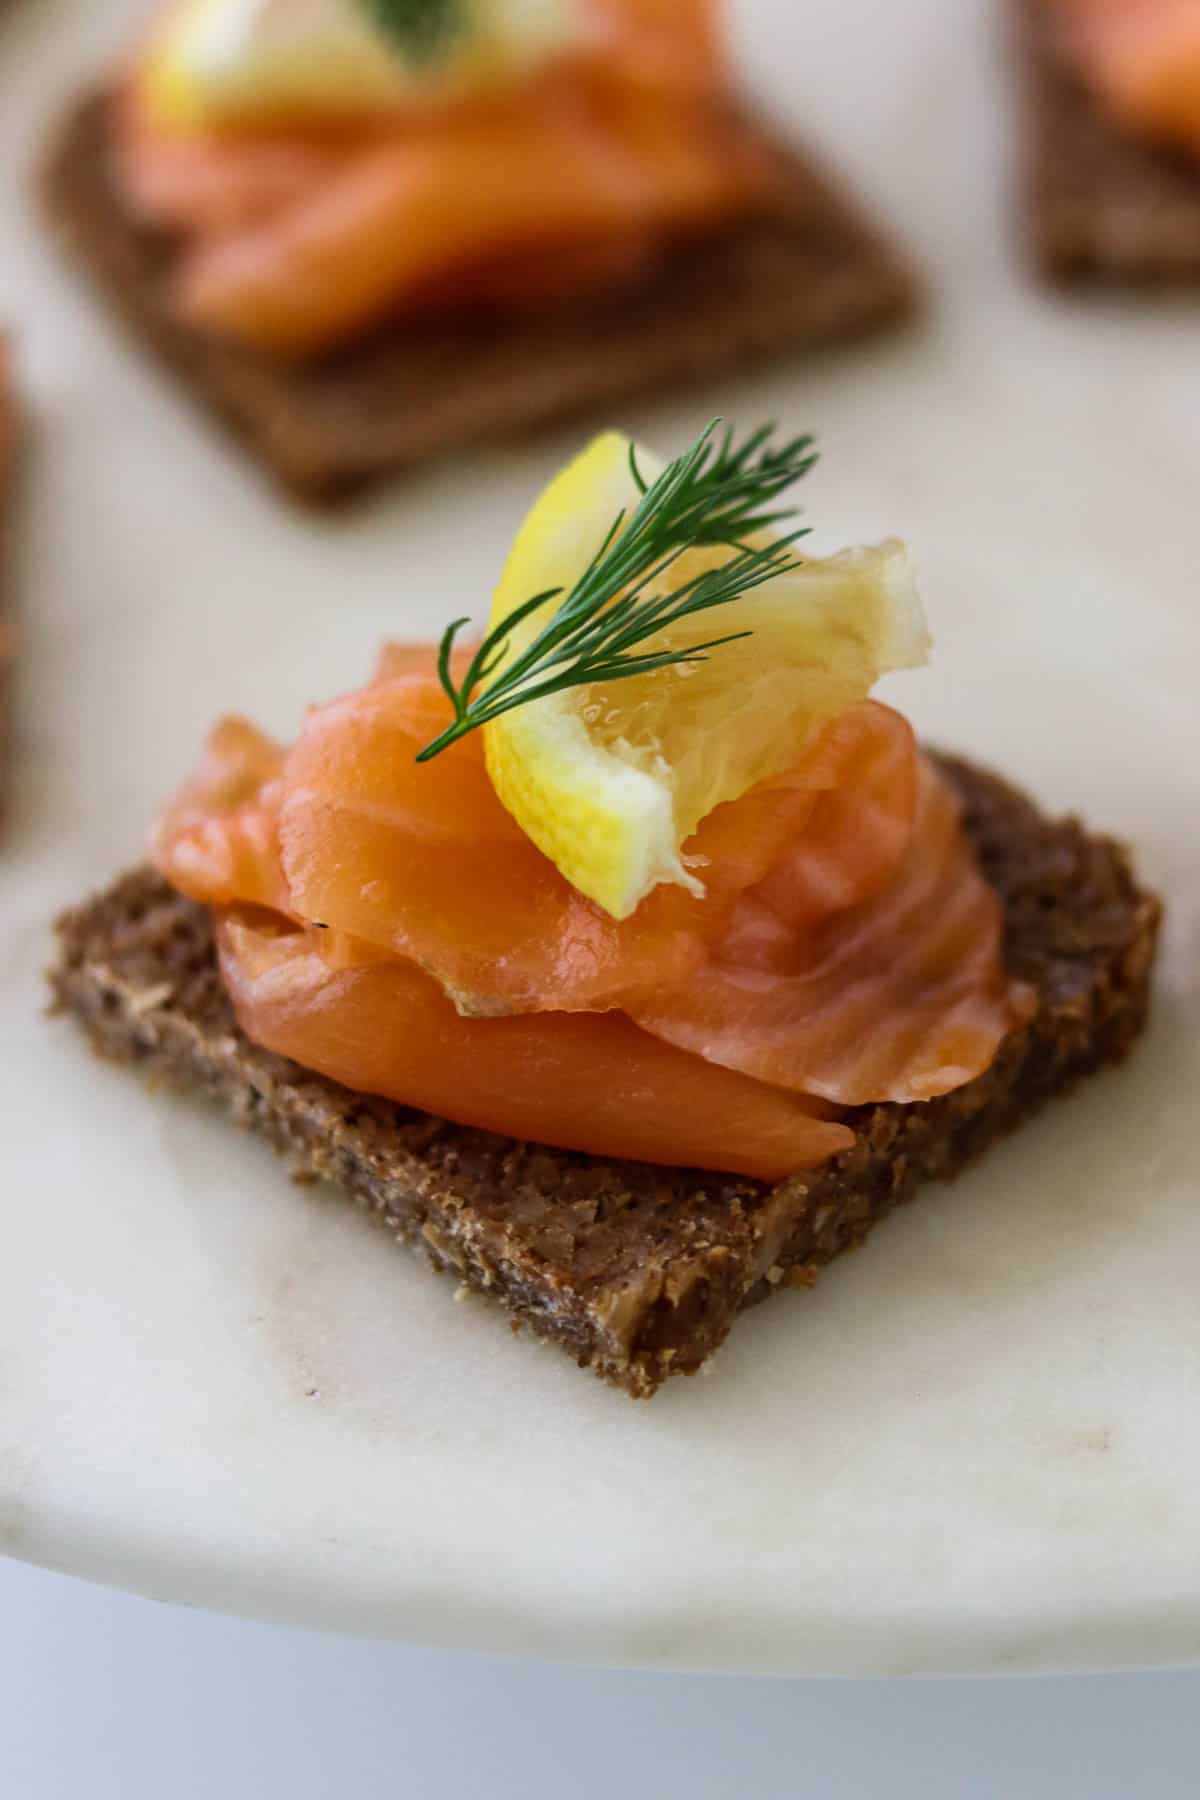 Gravlax (cured salmon) on rye bread with lemon and dill.